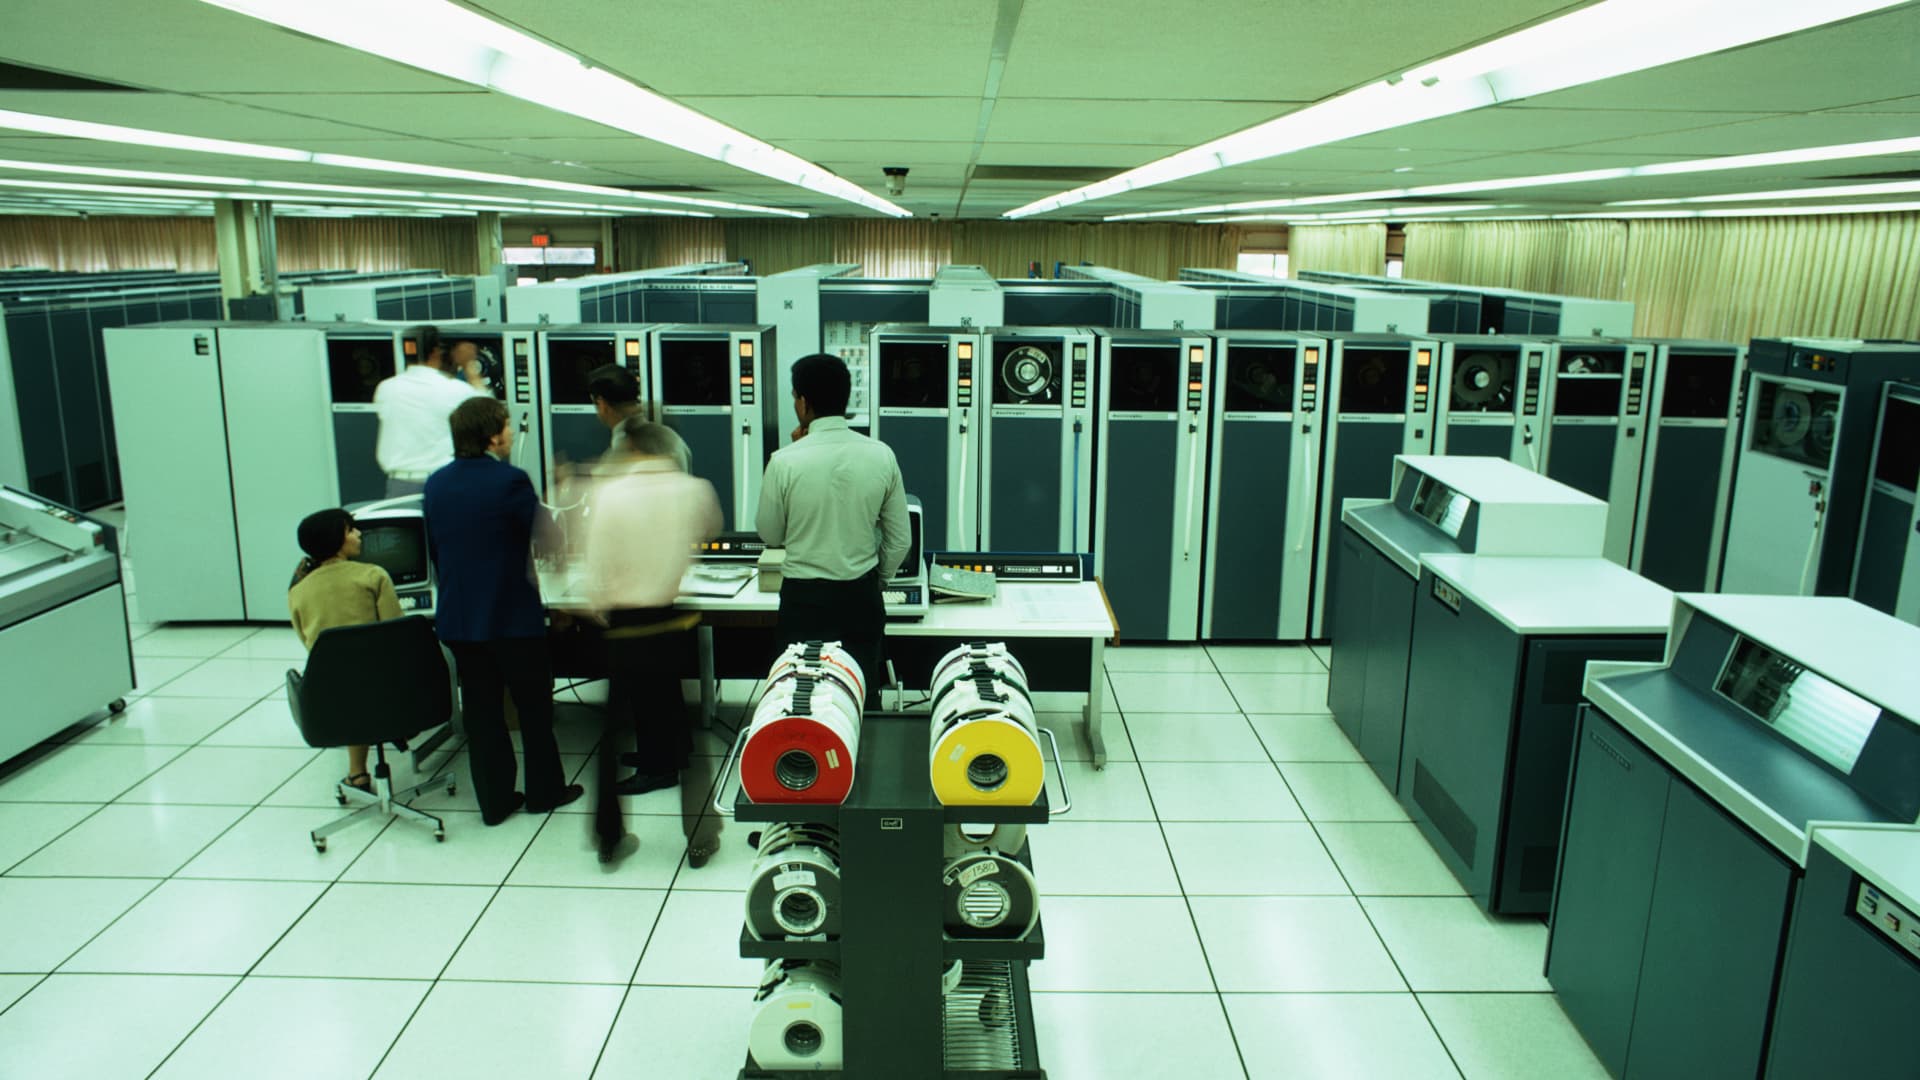 Many states labor departments work with outdated mainframe computer systems from the 1970s.